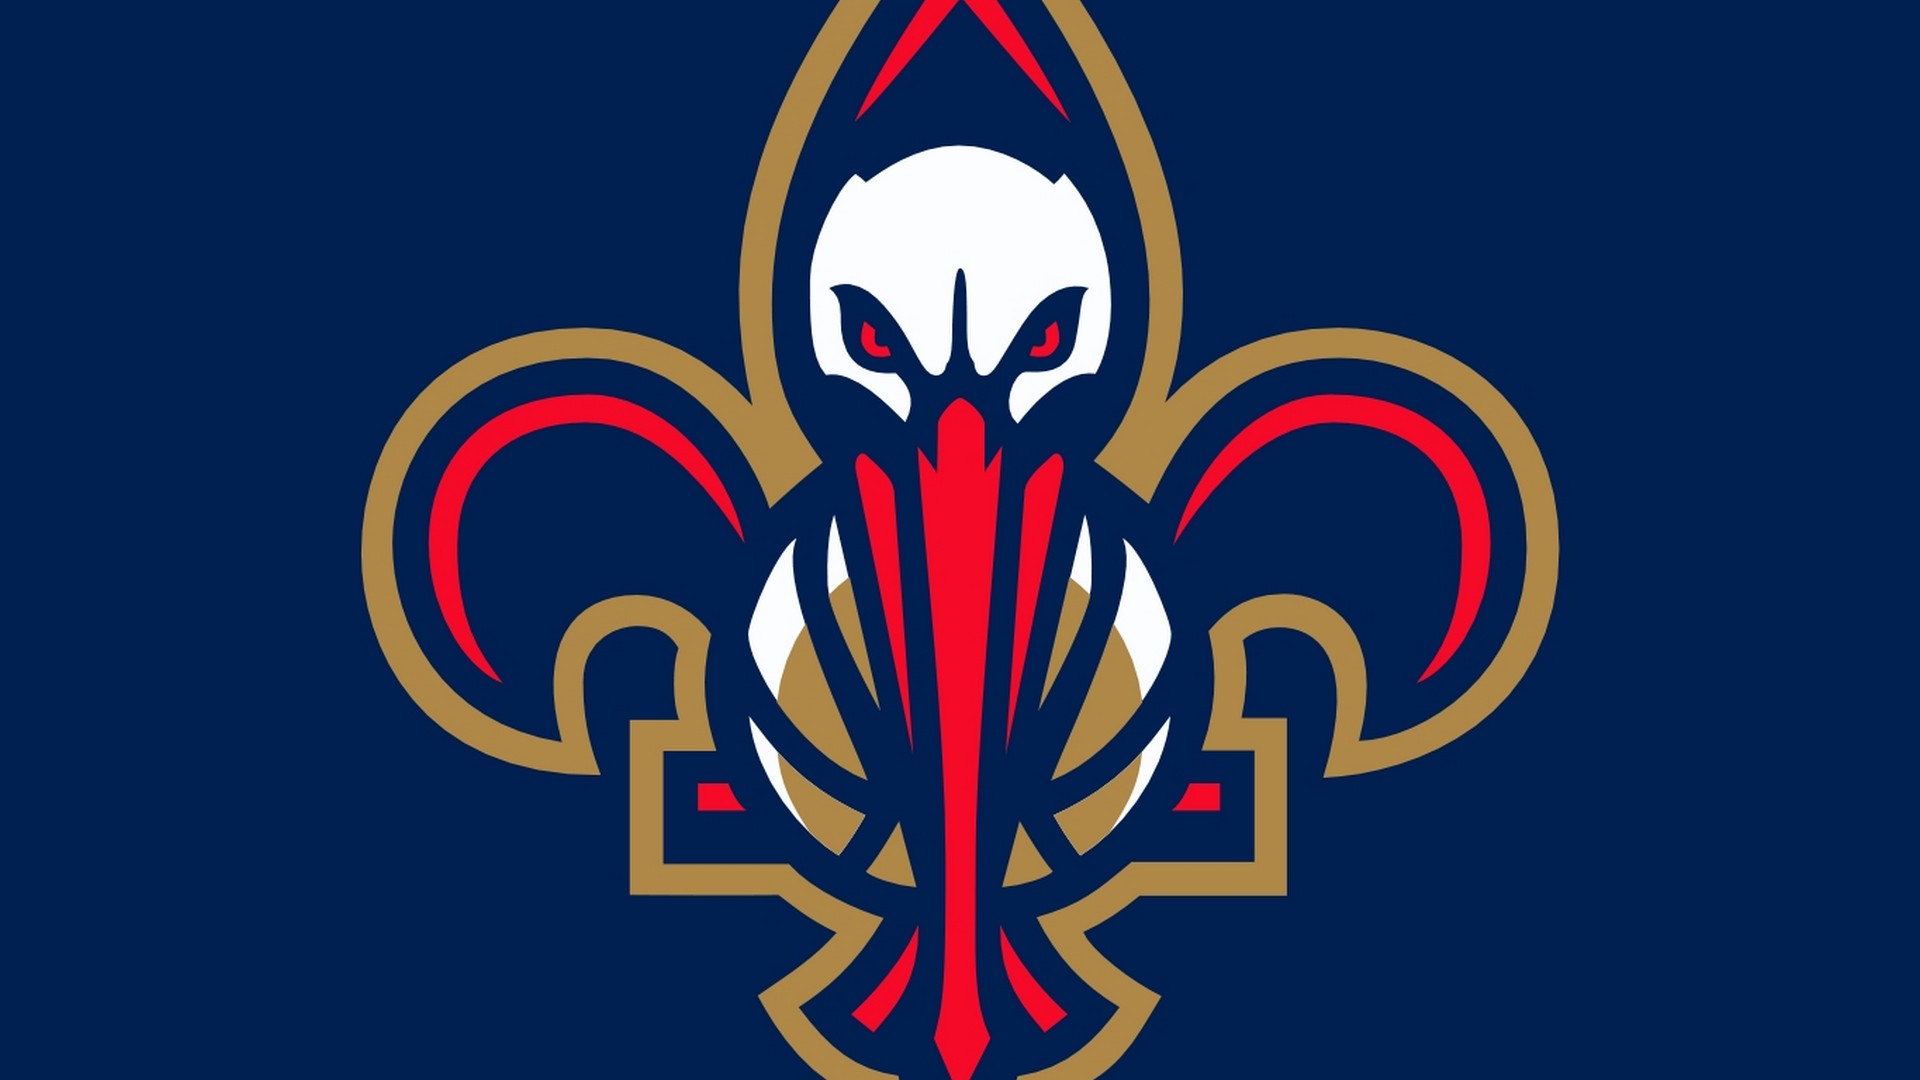 Wallpaper Desktop New Orleans Pelicans HD with high-resolution 1920x1080 pixel. You can use this wallpaper for your Desktop Computer Backgrounds, Windows or Mac Screensavers, iPhone Lock screen, Tablet or Android and another Mobile Phone device